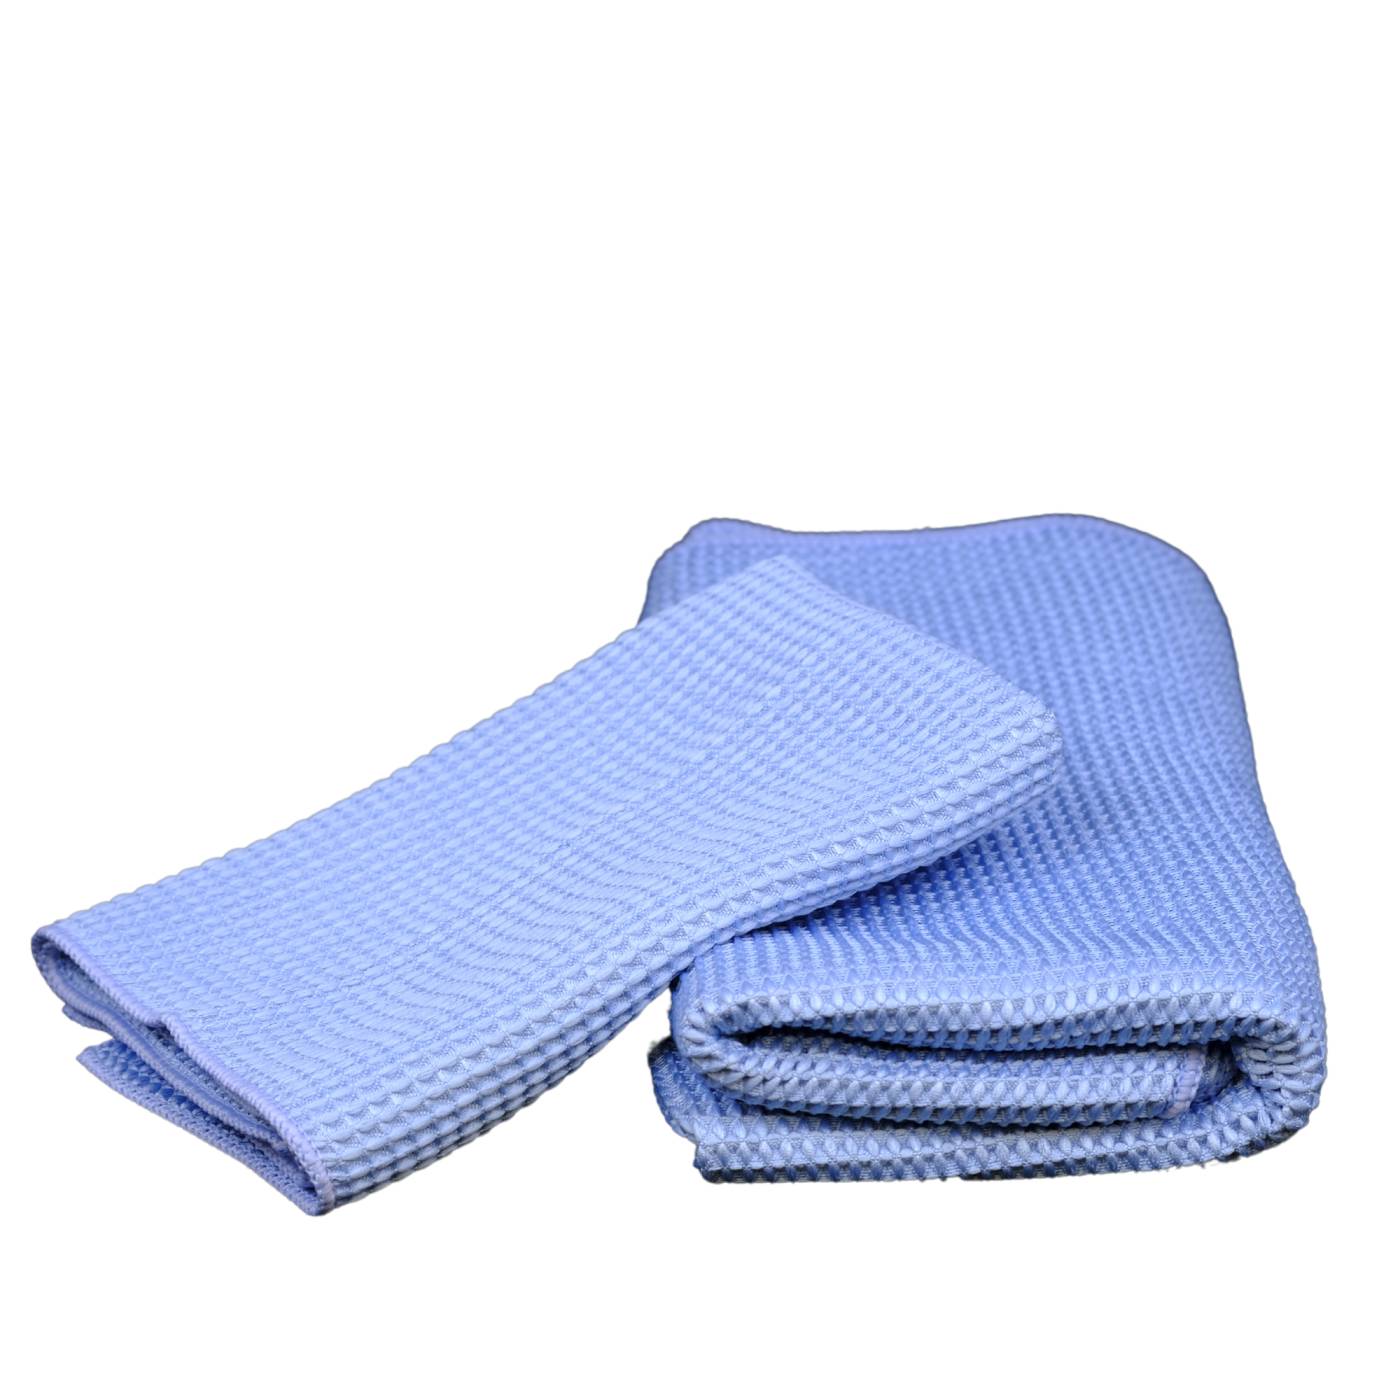 Both Sizes of Waffle Cloth in Blue